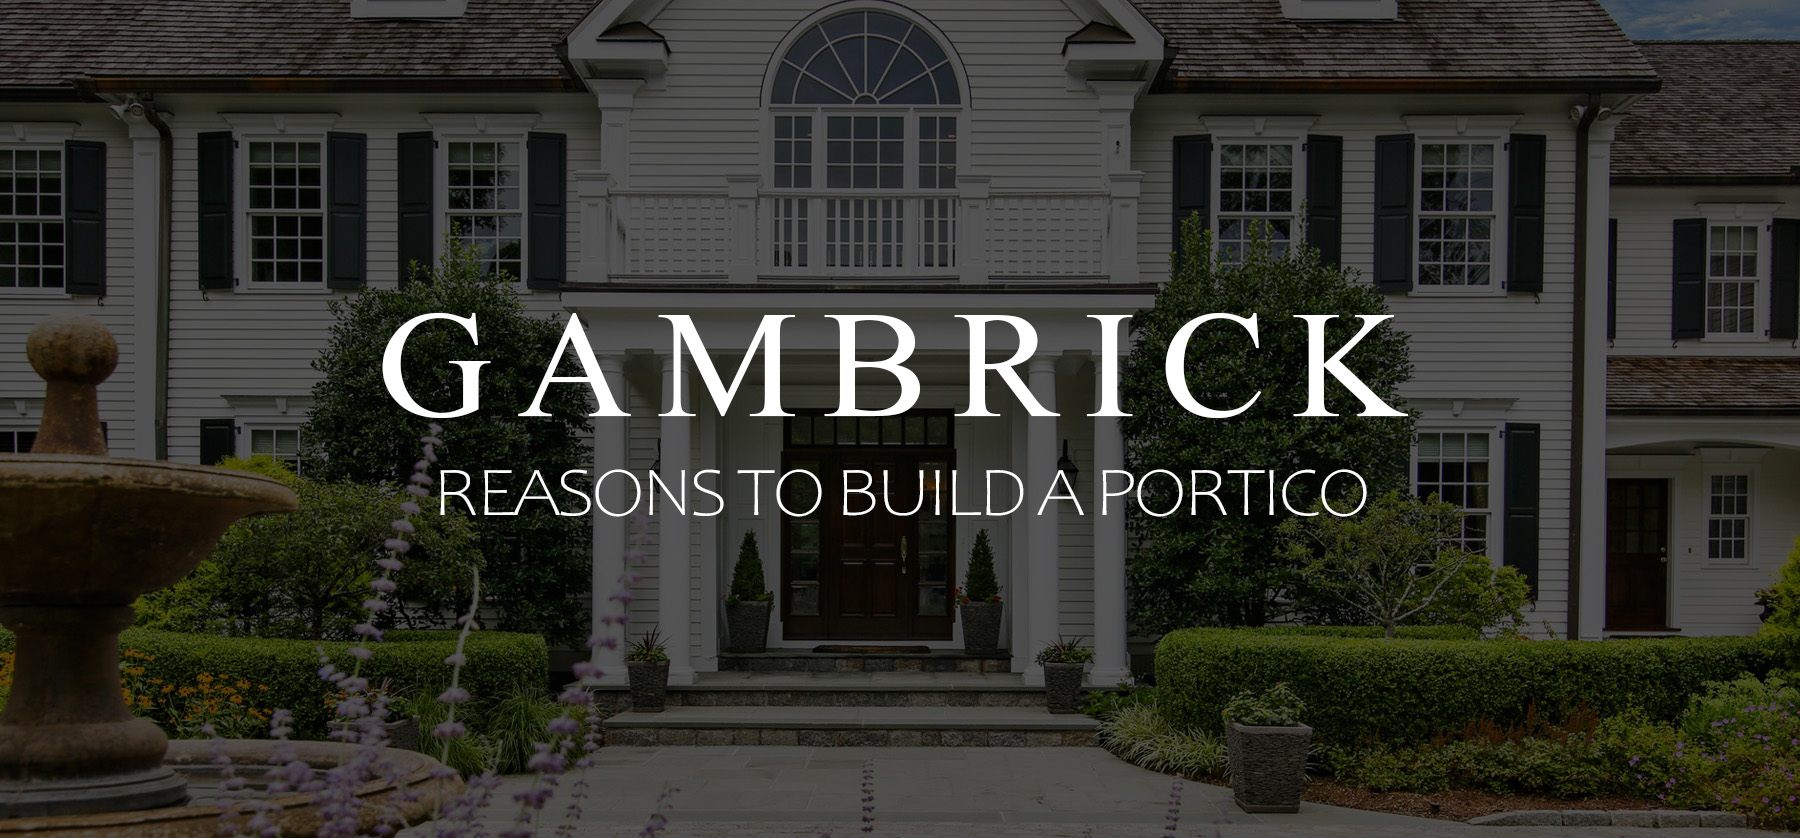 reasons to build a portico banner 1